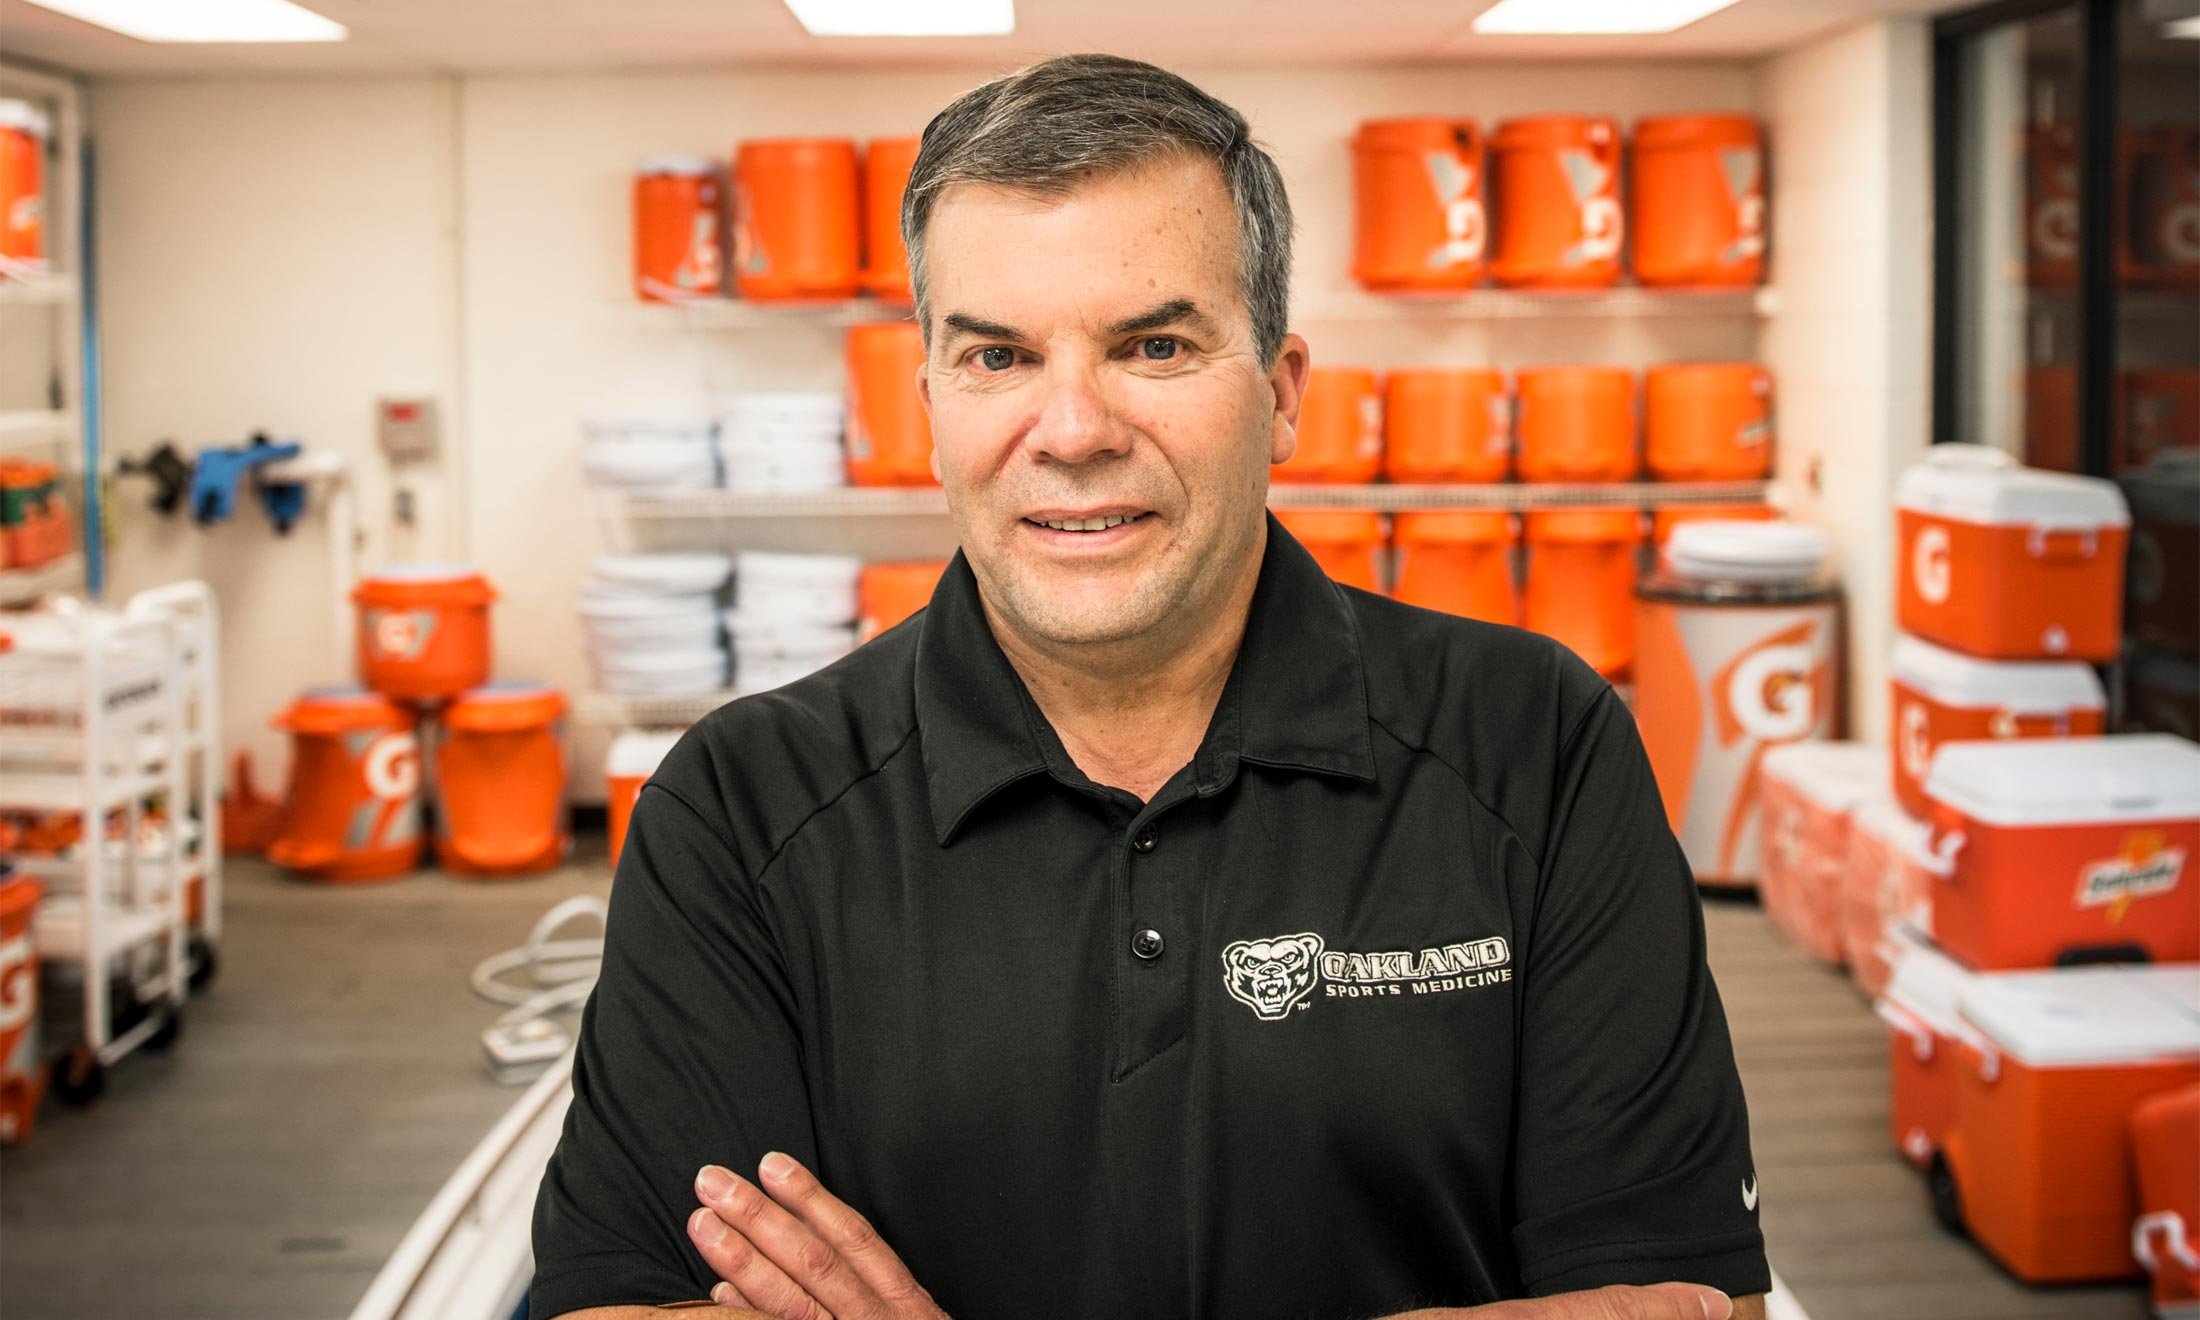 Oakland University athletics trainer Tom Ford stands in front of orange water coolers in a water training room